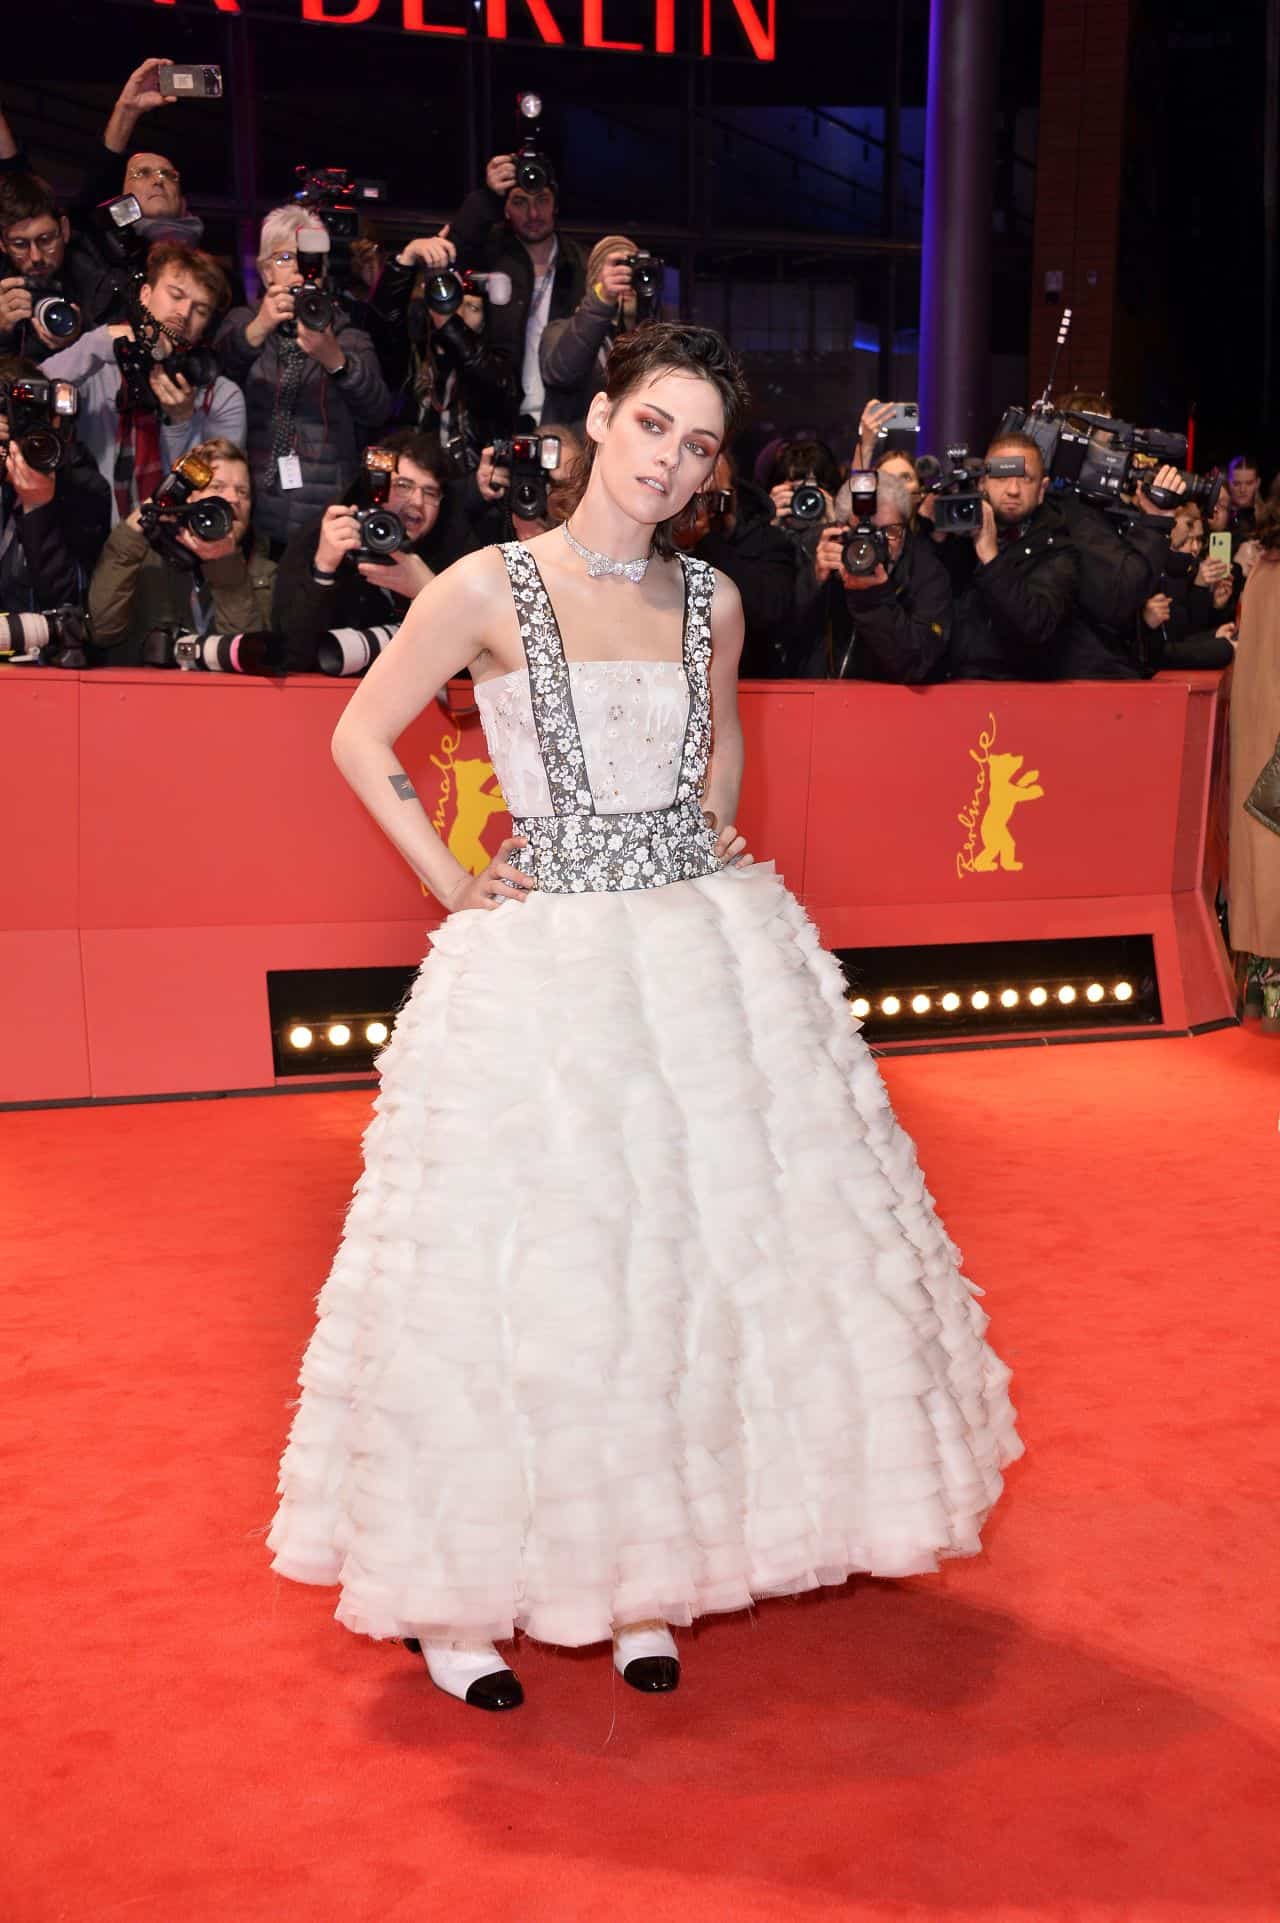 Kristen Stewart Posing in a White Ruffled Gown at She Came To Me Premiere